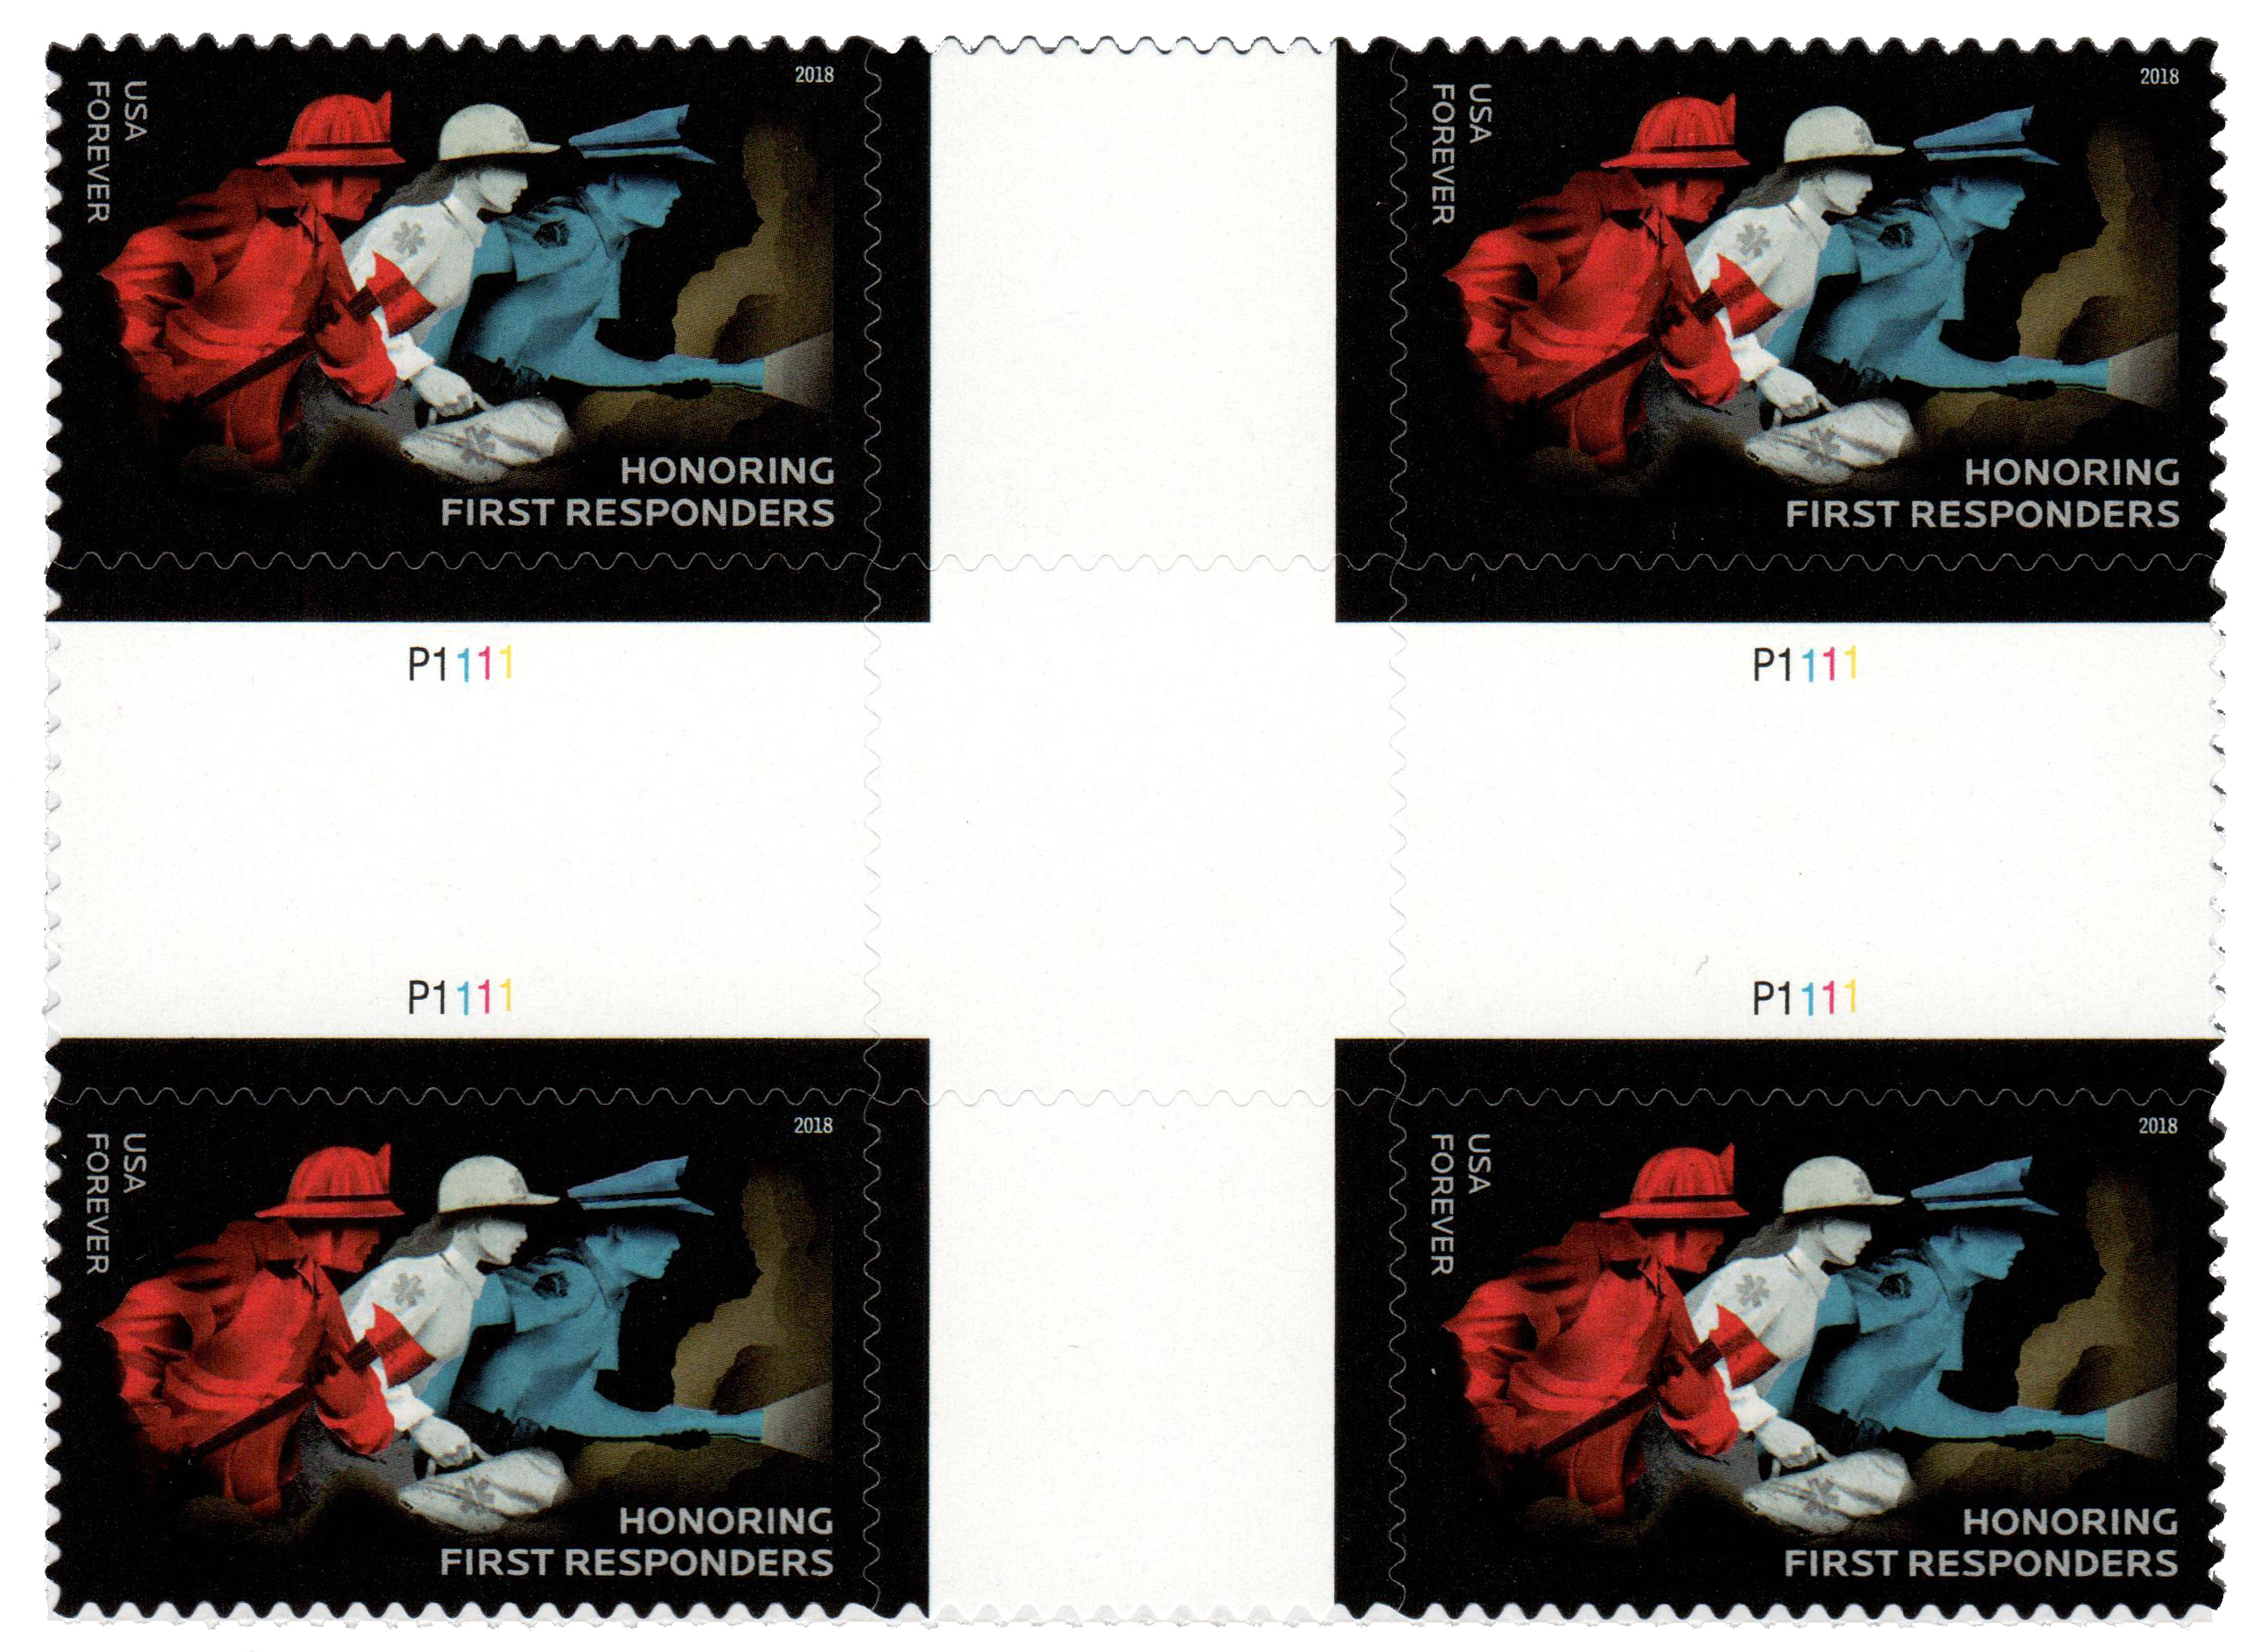  Honoring First Responders Forever Stamps (1 Sheet of